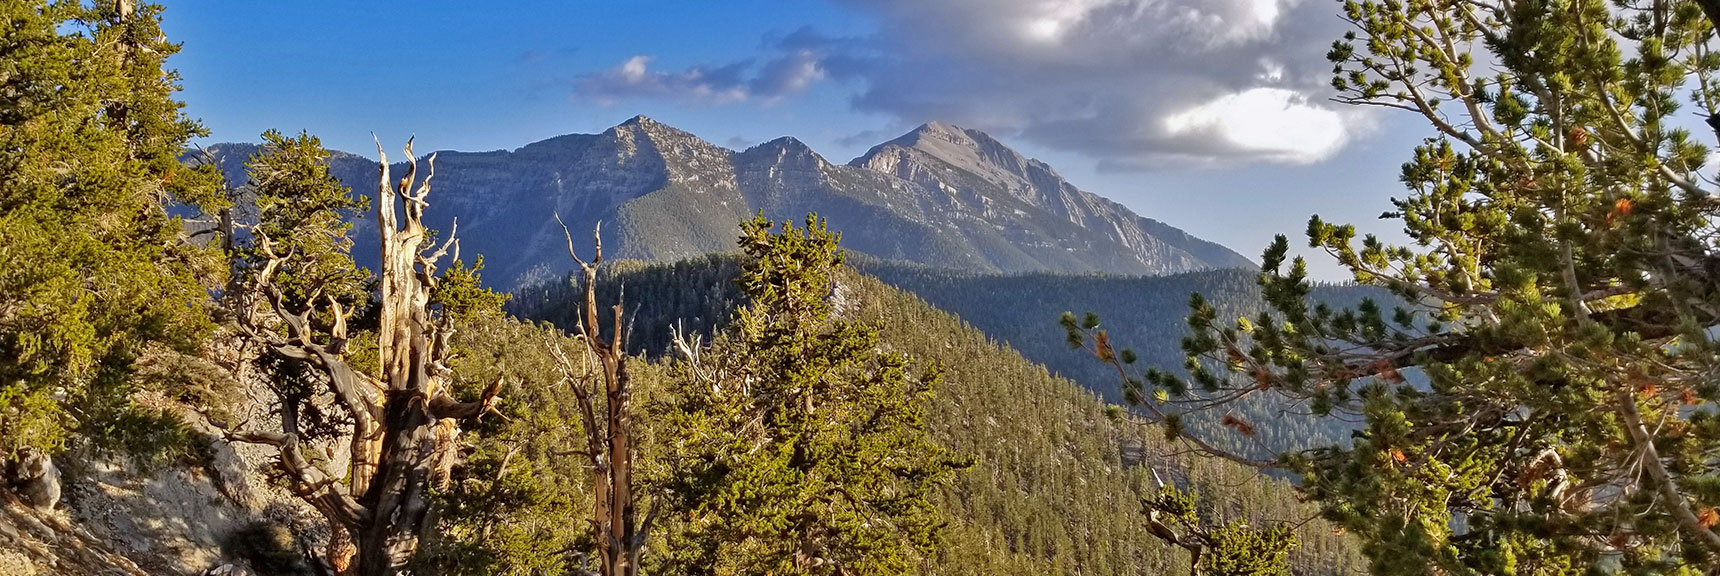 Charleston Peak in the Late Afternoon Sun from the Bonanza Trail | Bonanza Peak from Lee Canyon via the Lower Bristlecone Pine Trail and Bonanza Trail | Spring Mountains, Nevada